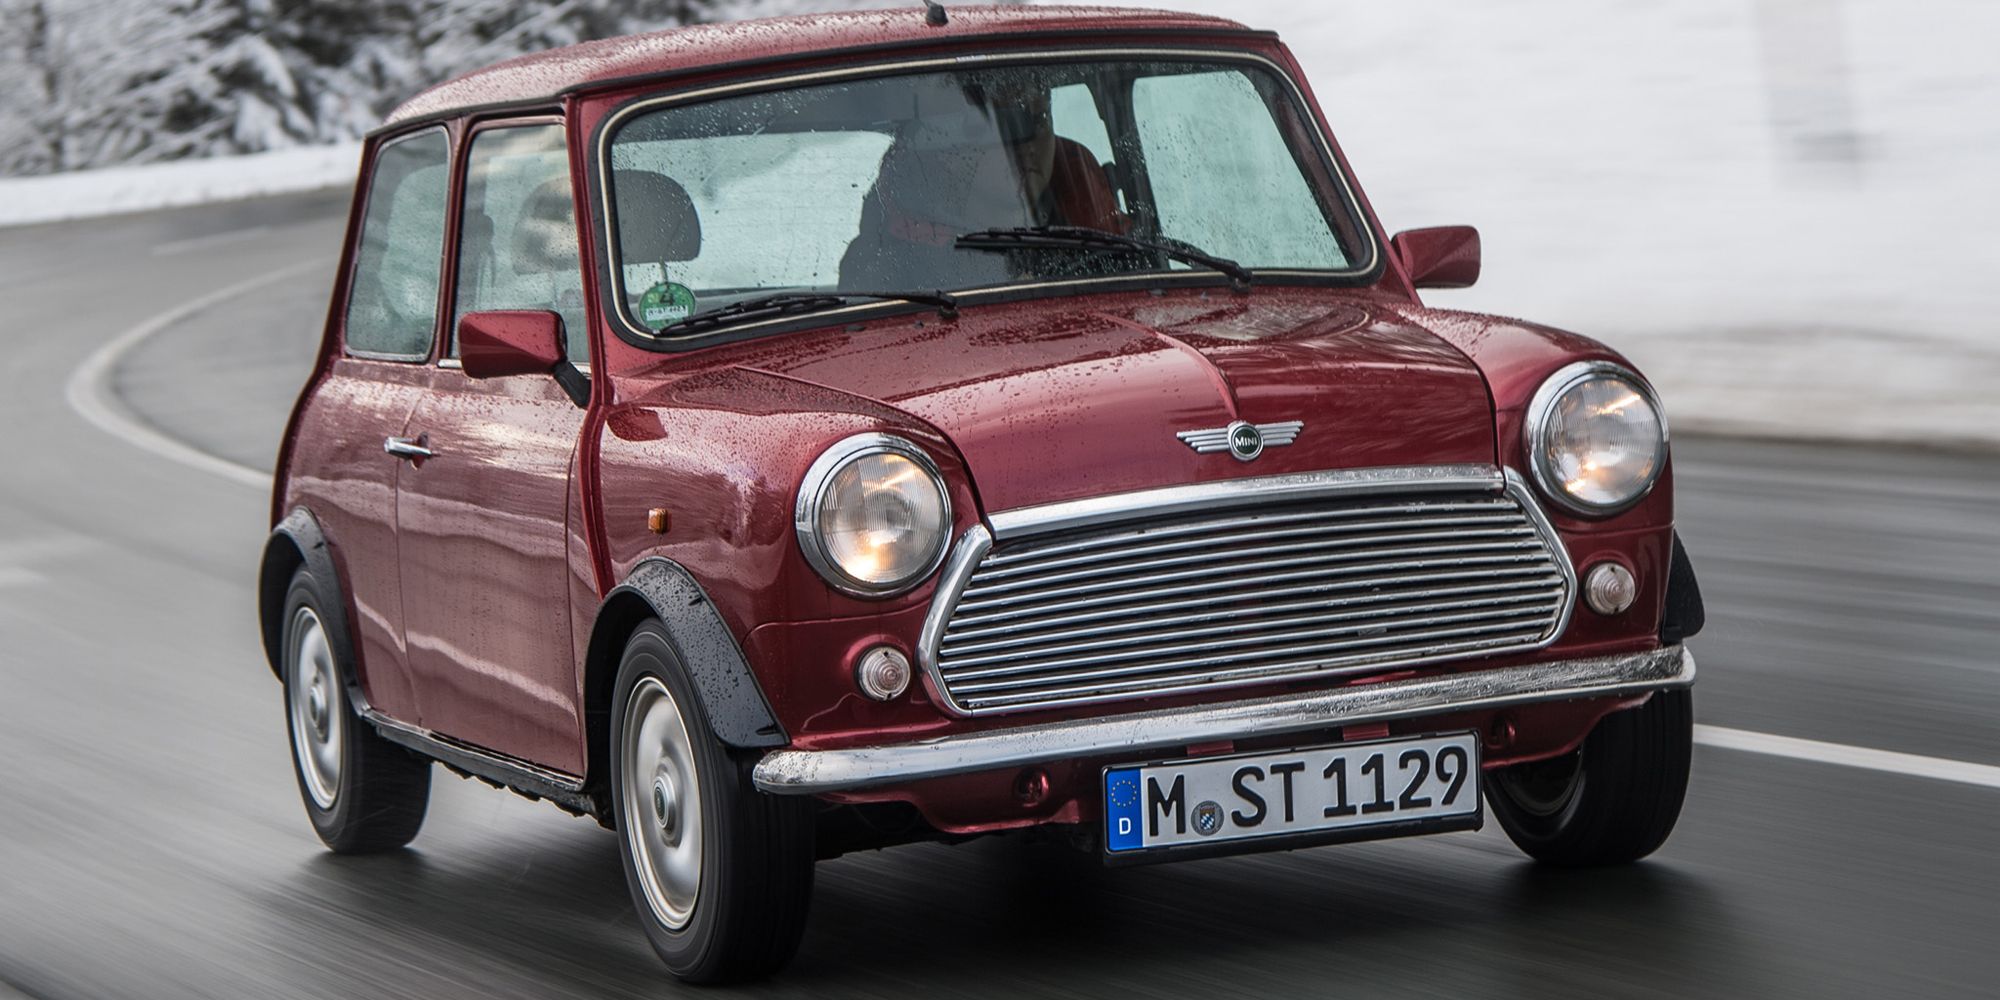 The front of a red Rover Mini